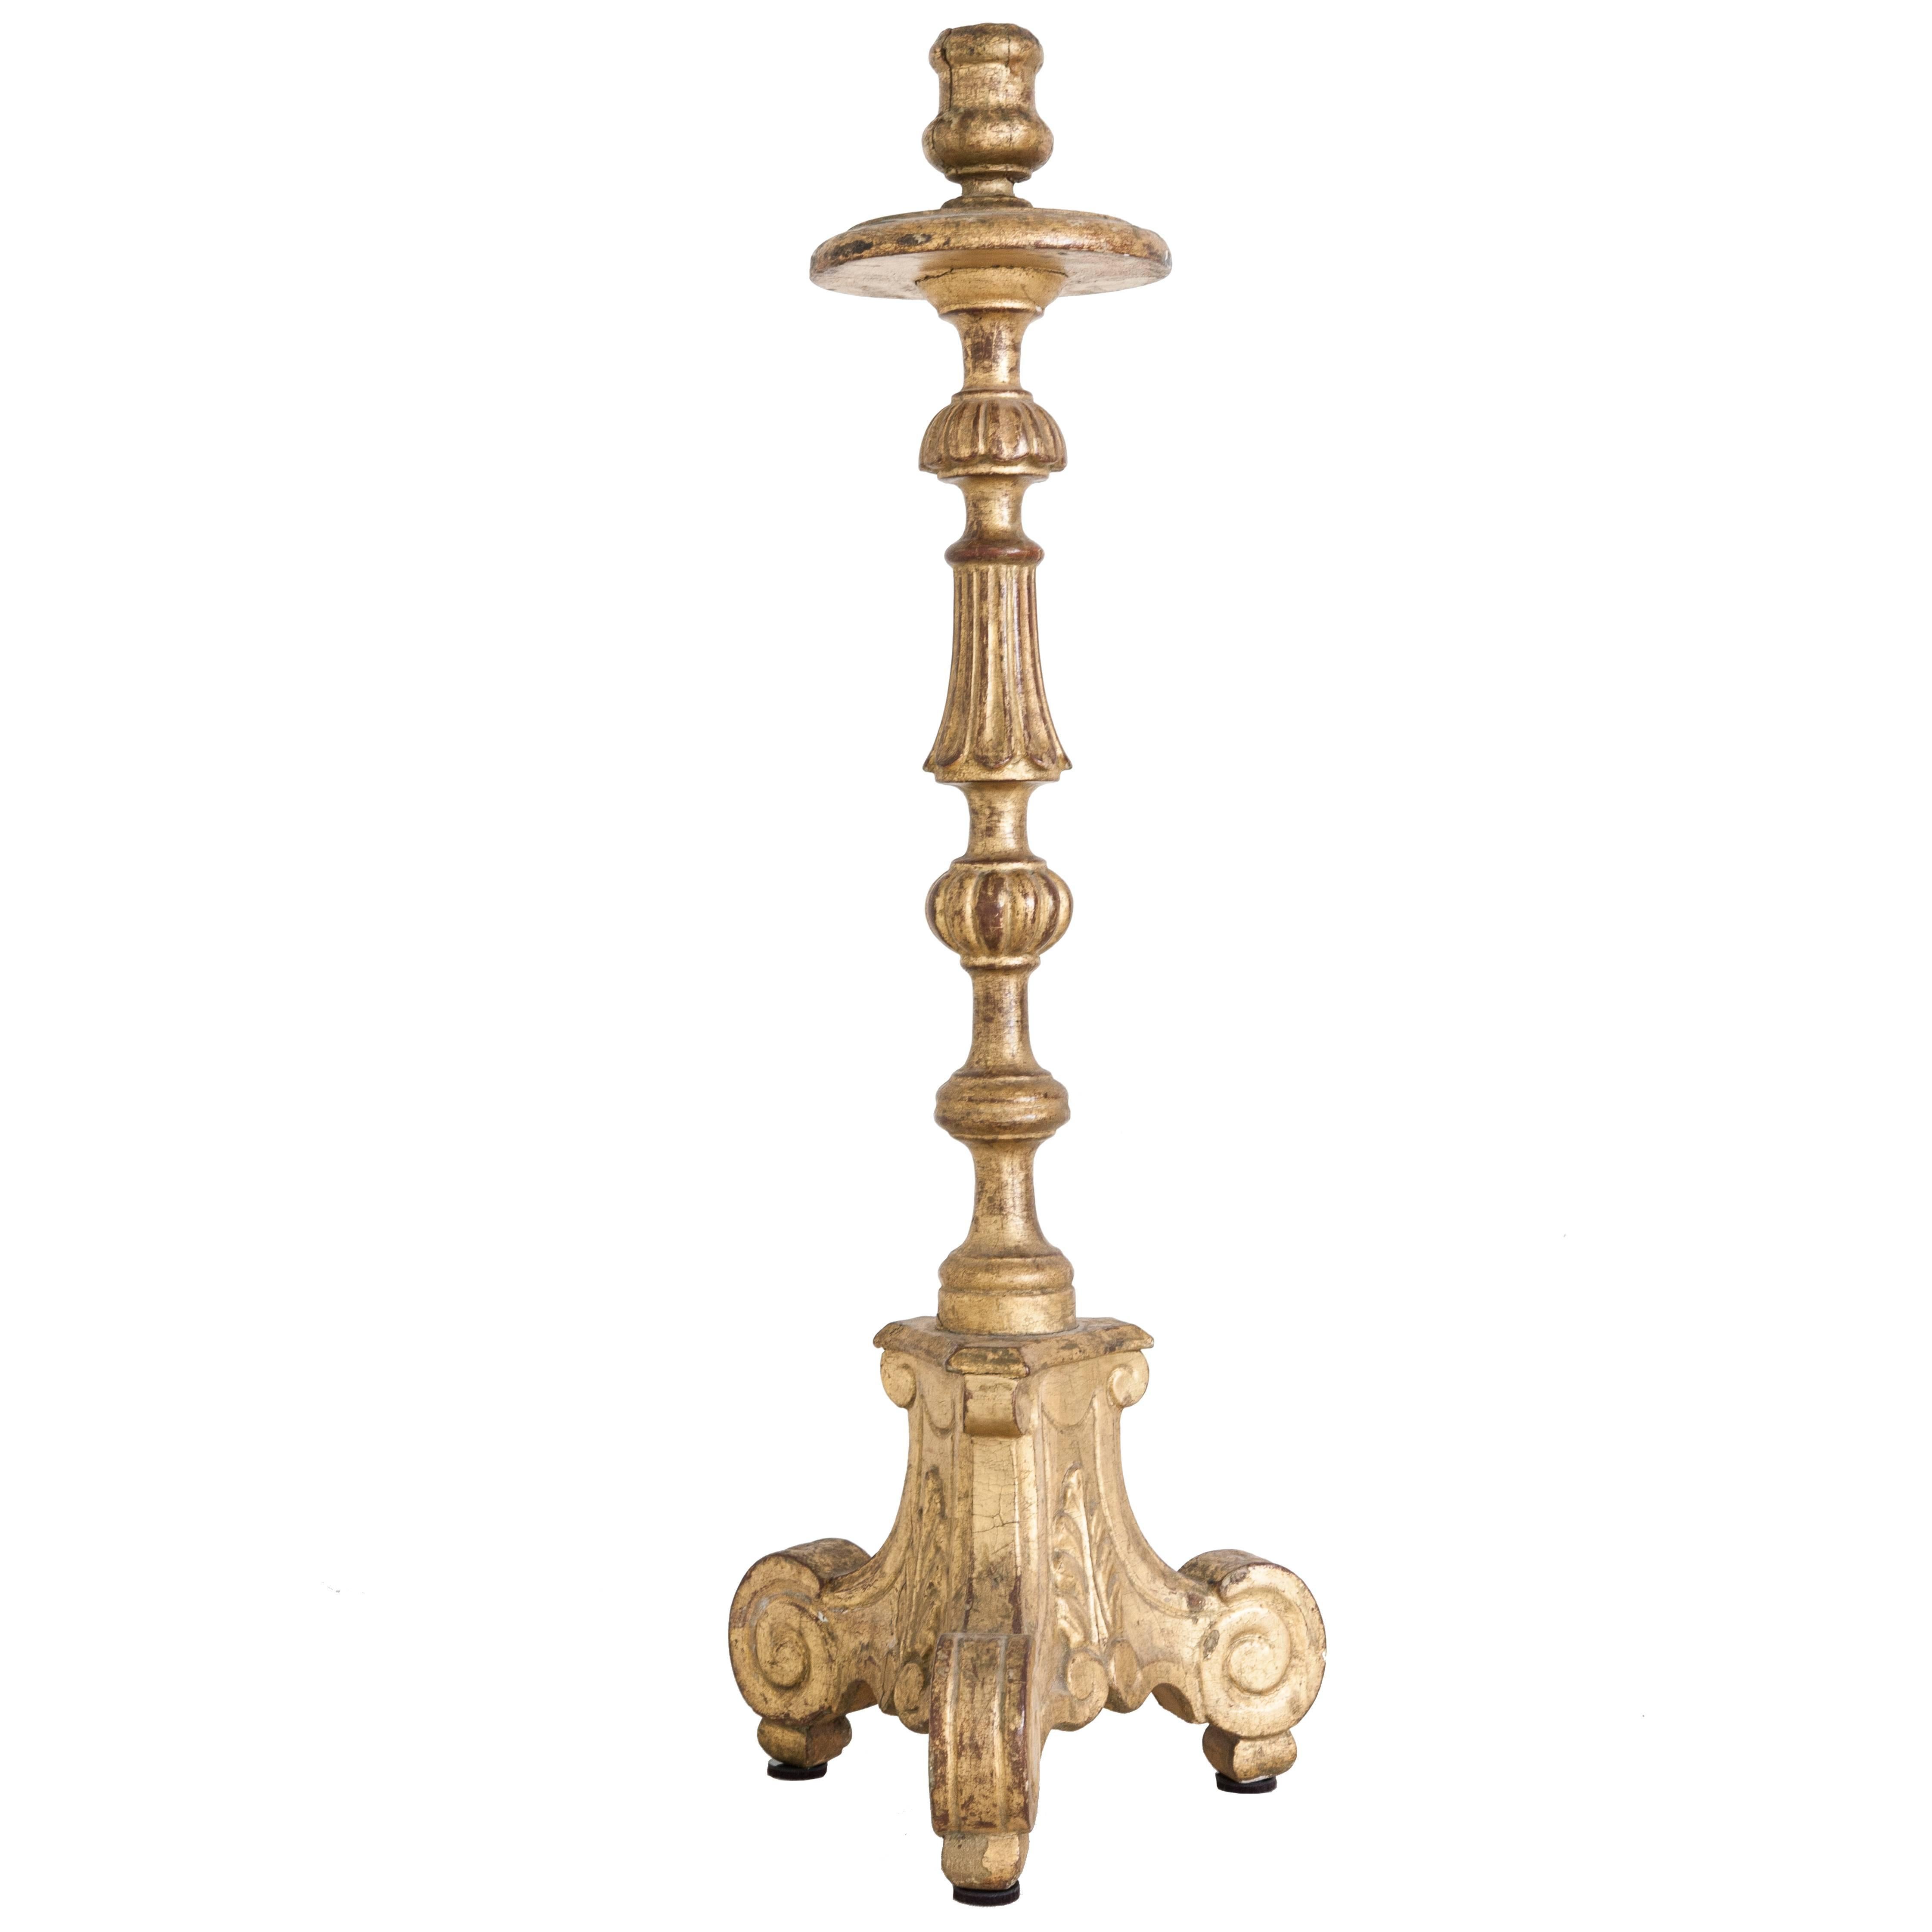 18th Century French Giltwood Pricket or Candlestick from a Chateau Chapel Altar